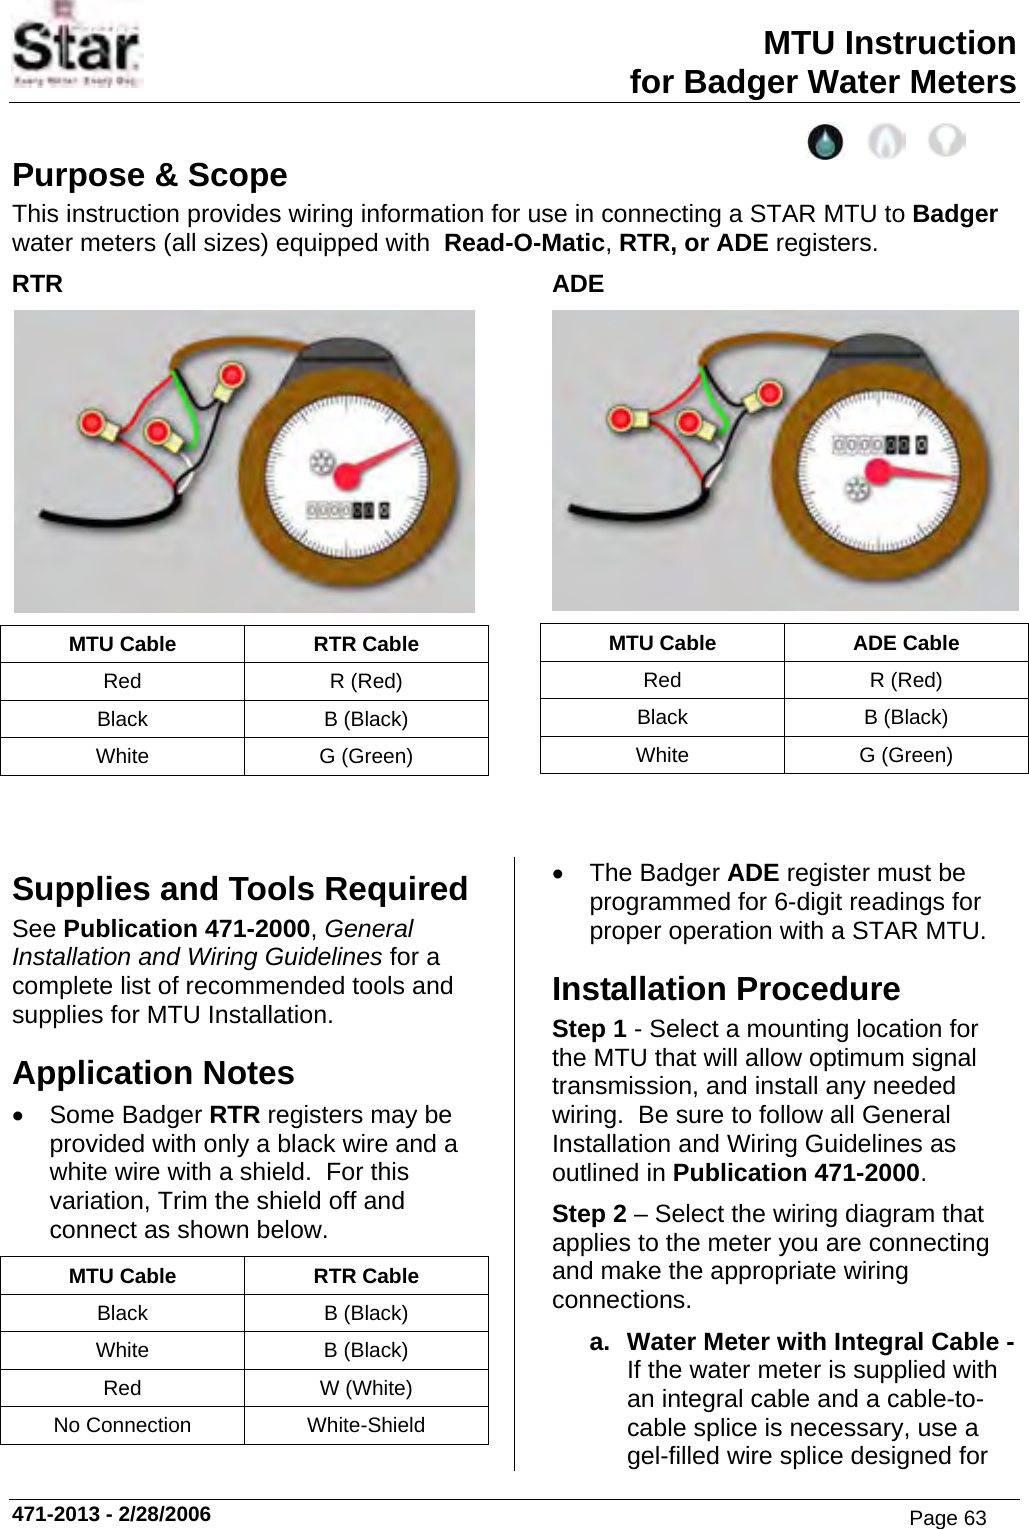 MTU Instruction for Badger Water Meters Purpose &amp; Scope This instruction provides wiring information for use in connecting a STAR MTU to Badger water meters (all sizes) equipped with  Read-O-Matic, RTR, or ADE registers. RTR  MTU Cable  RTR Cable Red R (Red) Black B (Black) White G (Green) ADE  MTU Cable  ADE Cable Red R (Red) Black B (Black) White G (Green)   Supplies and Tools Required See Publication 471-2000, General Installation and Wiring Guidelines for a complete list of recommended tools and supplies for MTU Installation. Application Notes • Some Badger RTR registers may be provided with only a black wire and a white wire with a shield.  For this variation, Trim the shield off and connect as shown below. MTU Cable  RTR Cable Black B (Black) White B (Black) Red W (White) No Connection  White-Shield • The Badger ADE register must be programmed for 6-digit readings for proper operation with a STAR MTU. Installation Procedure Step 1 - Select a mounting location for the MTU that will allow optimum signal transmission, and install any needed wiring.  Be sure to follow all General Installation and Wiring Guidelines as outlined in Publication 471-2000. Step 2 – Select the wiring diagram that applies to the meter you are connecting and make the appropriate wiring connections. a.  Water Meter with Integral Cable - If the water meter is supplied with an integral cable and a cable-to-cable splice is necessary, use a gel-filled wire splice designed for 471-2013 - 2/28/2006 Page 63